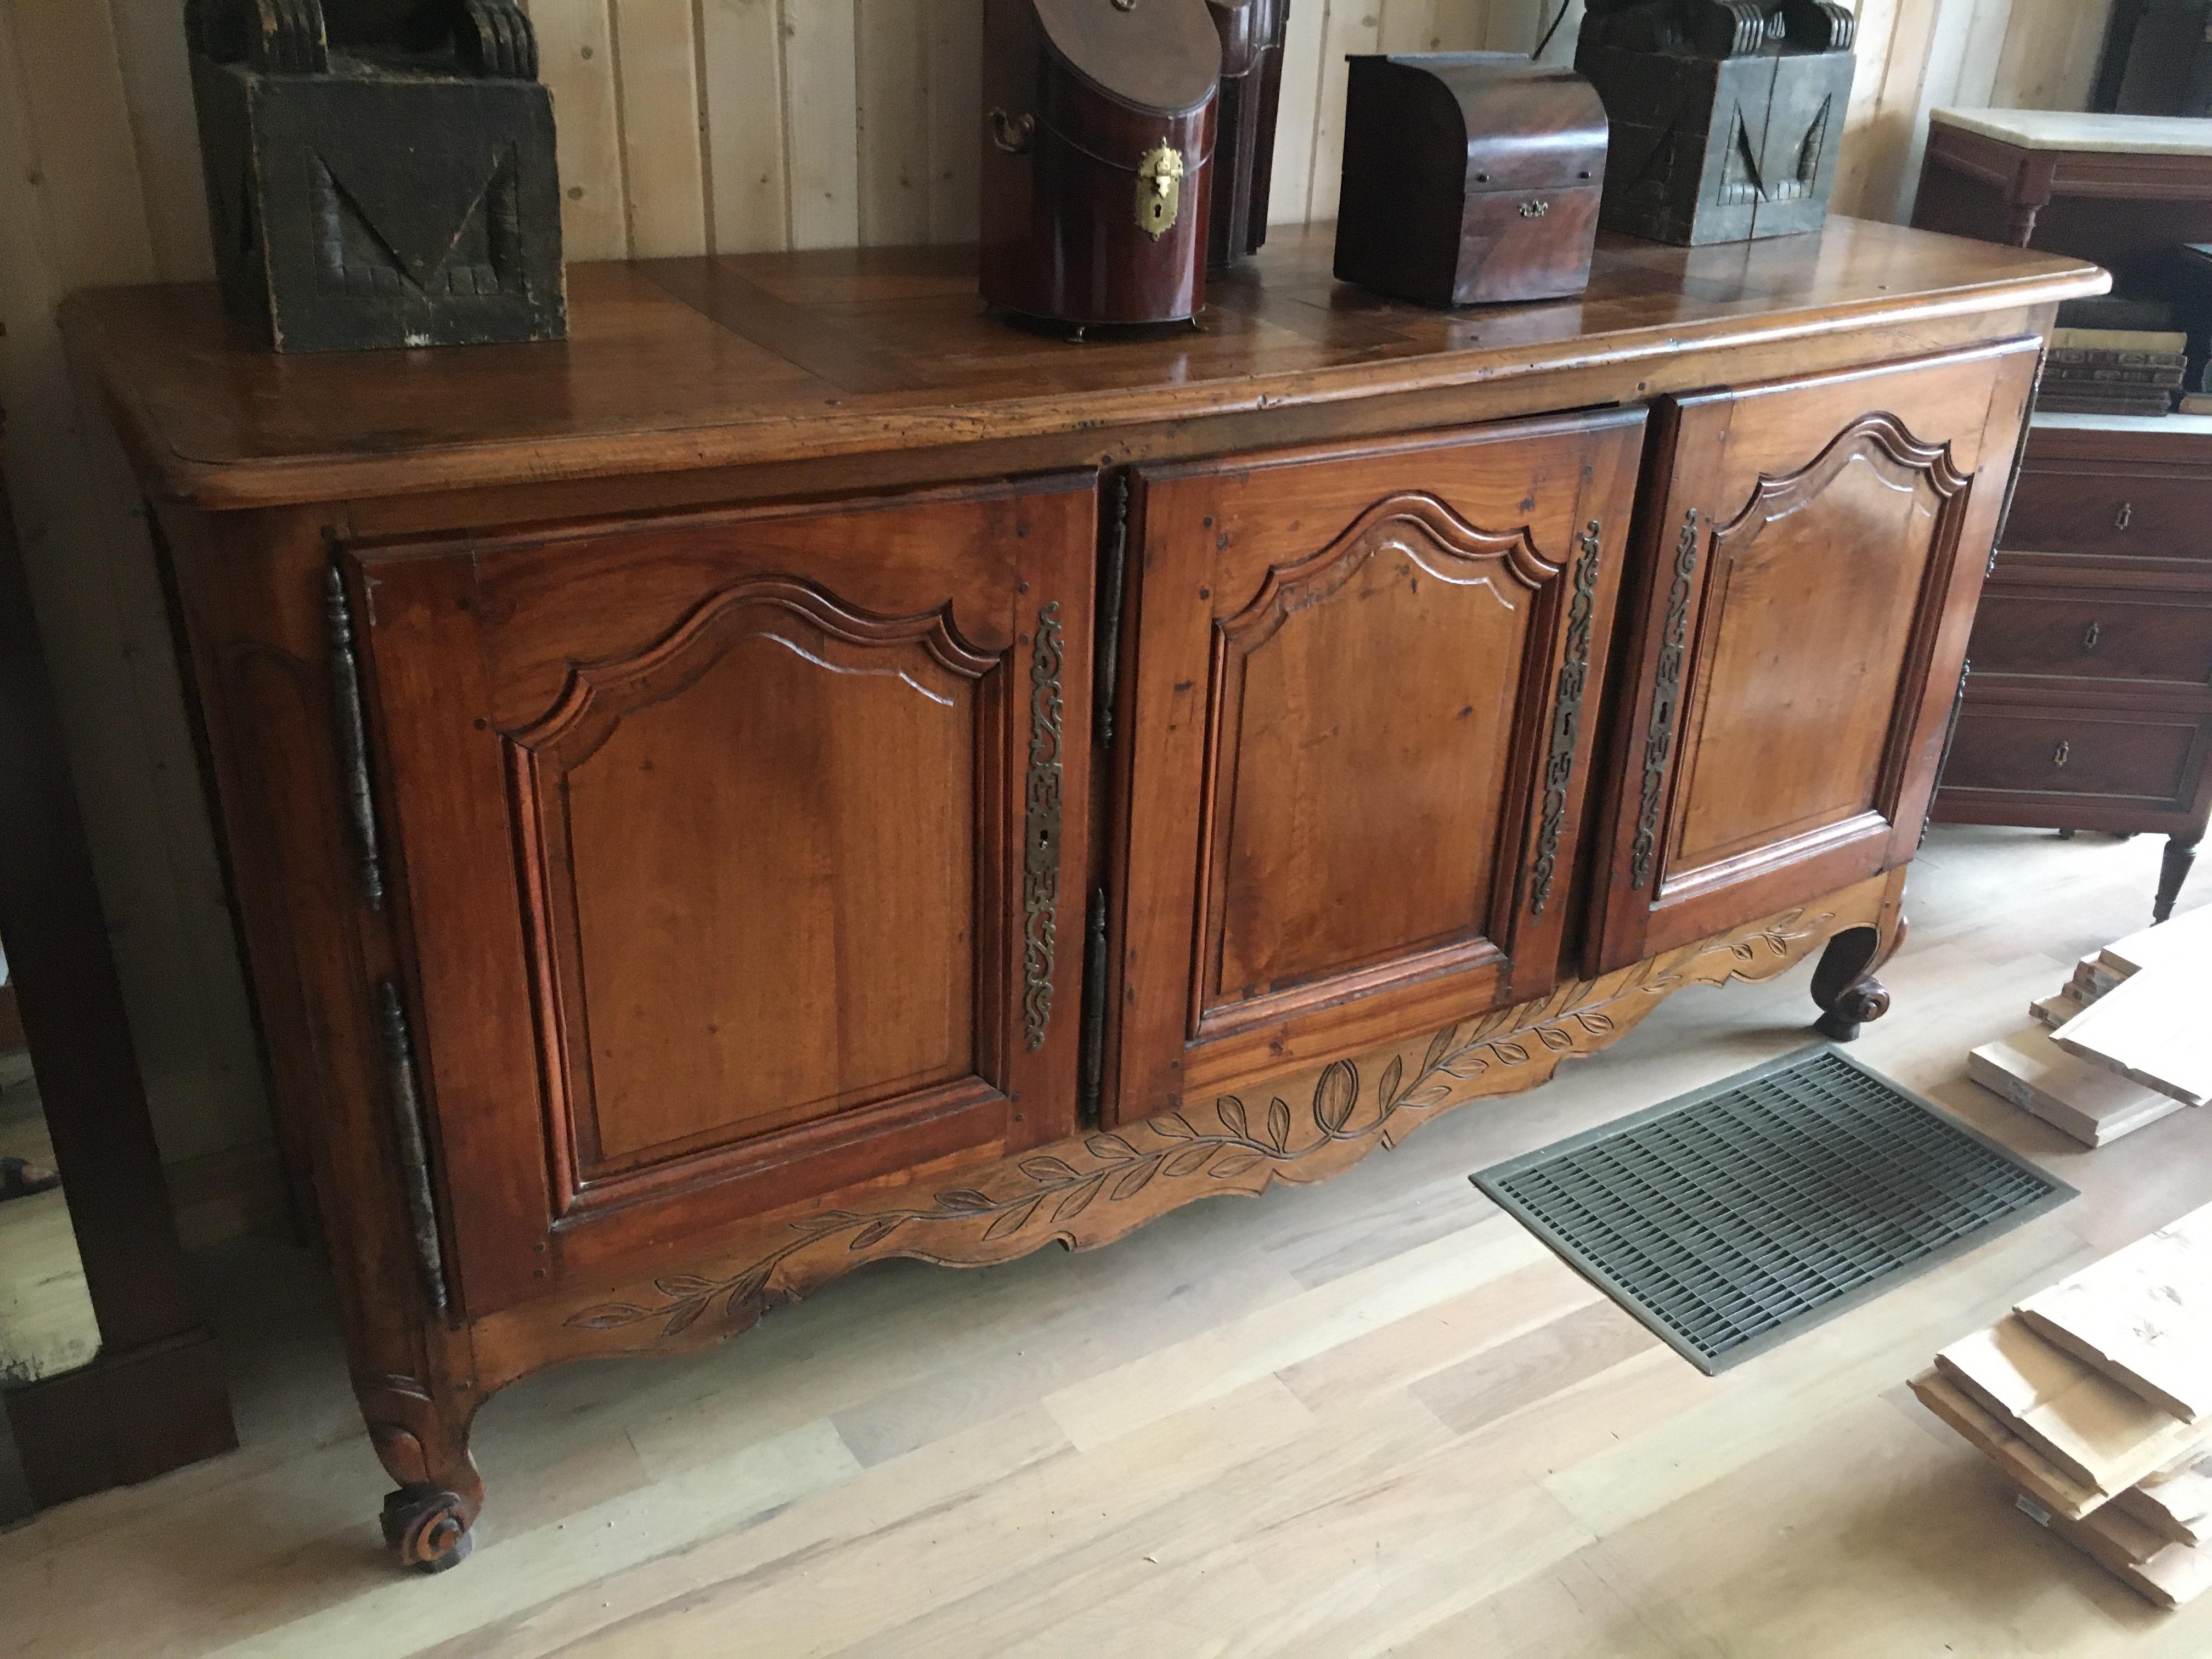 A 19th century provincial walnut sideboard height 40 1/2 x width 80 x depth 24 3/4 inches. Great color and patination.